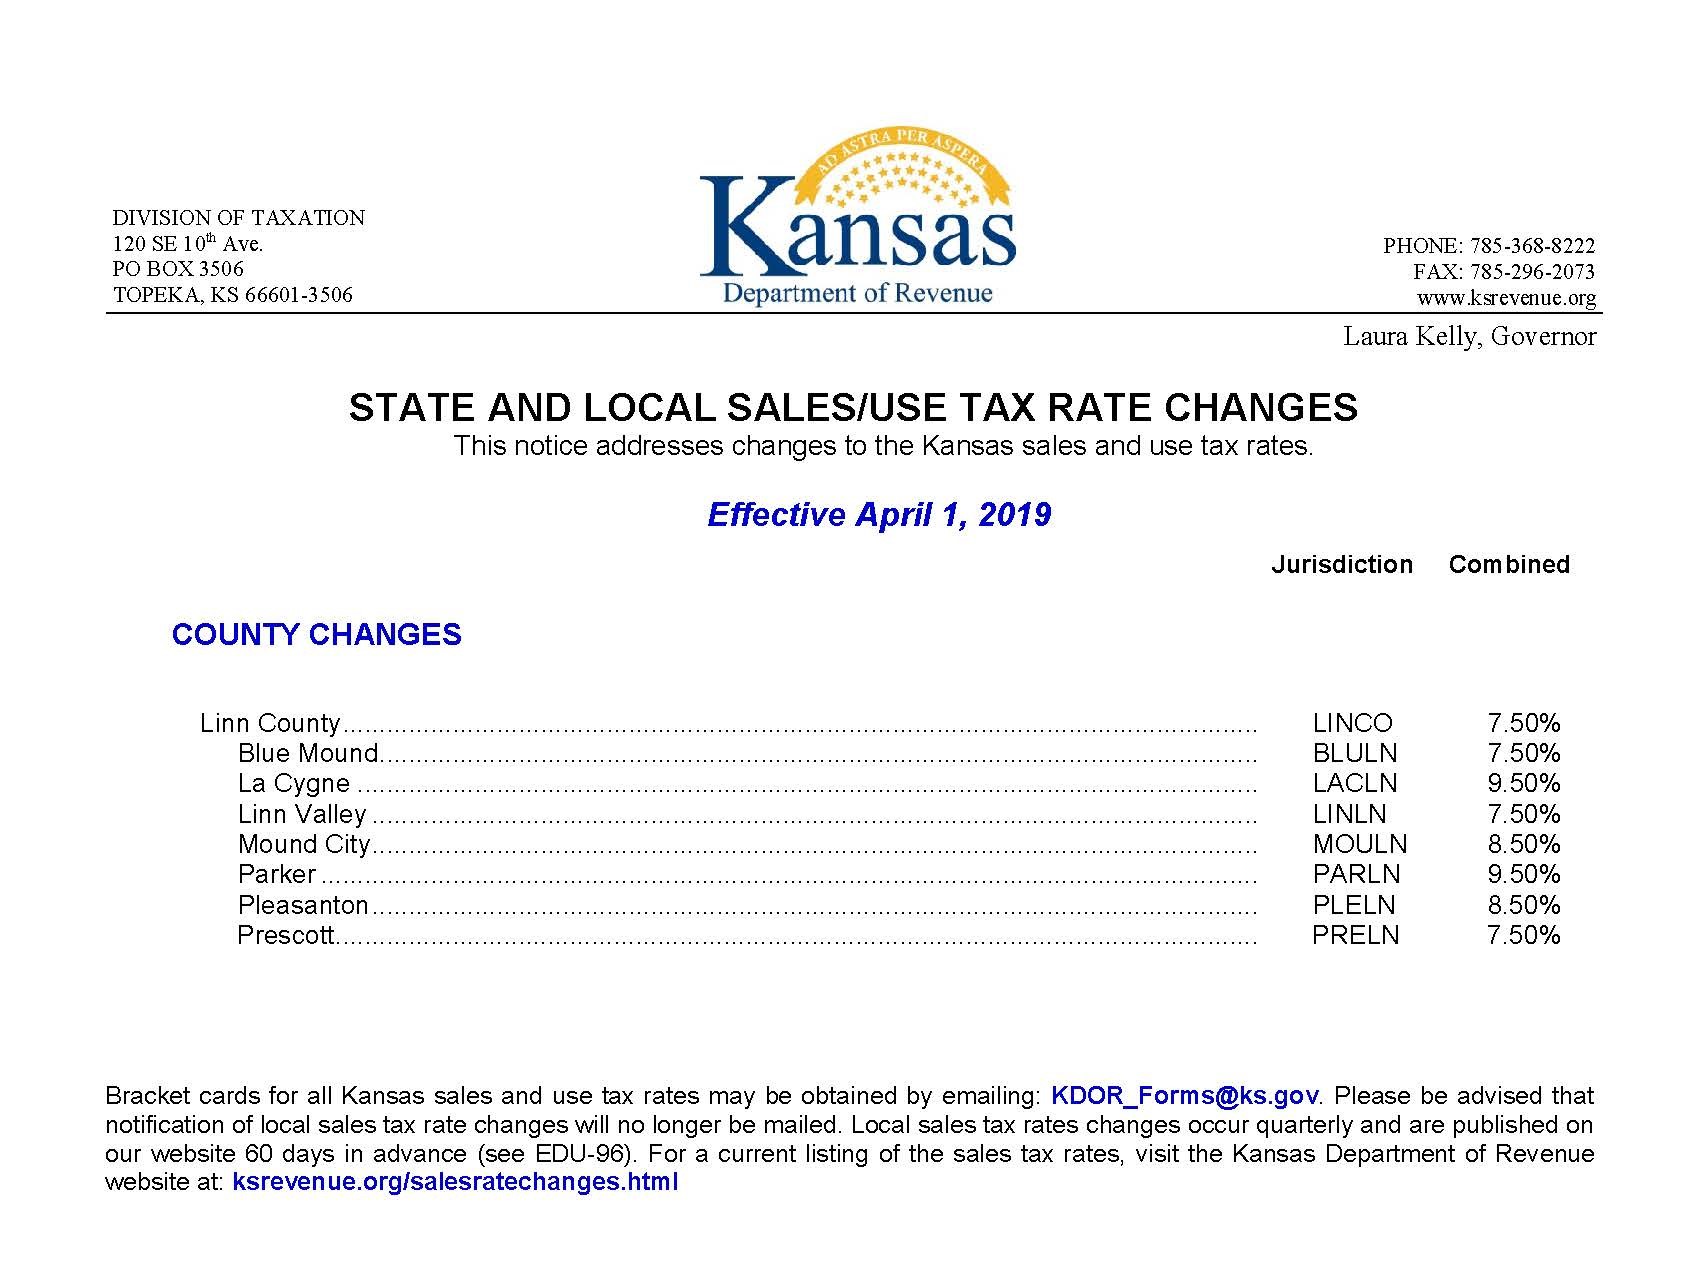 040119 Sales Tax Rate Changes Linn County, KS